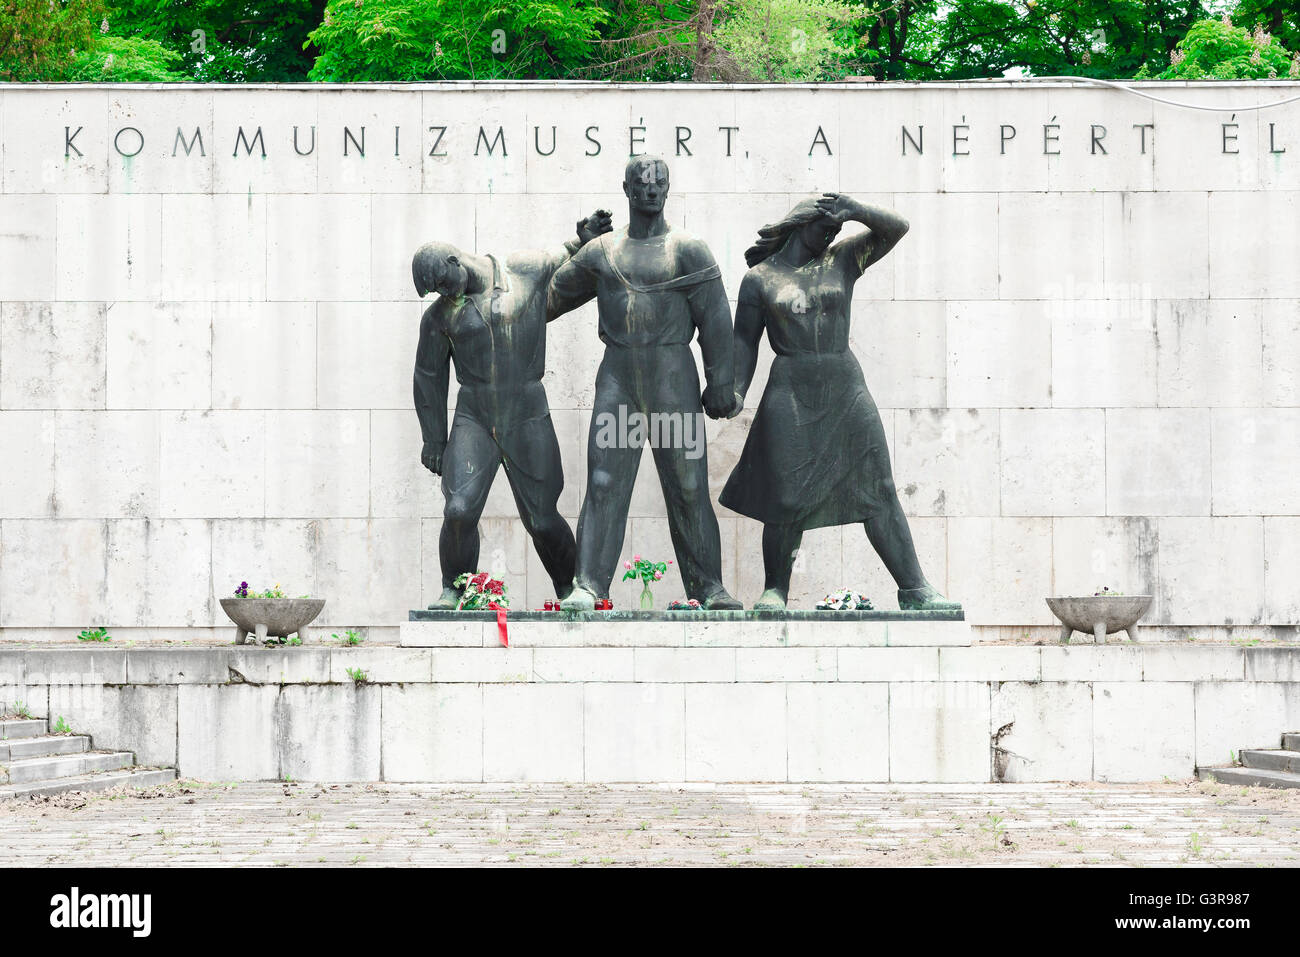 Budapest Kerepesi Cemetery, view of the Communist Pantheon Of The Working Class Movement in the Kerepesi Cemetery, Jozsefvaros, Budapest, Europe. Stock Photo